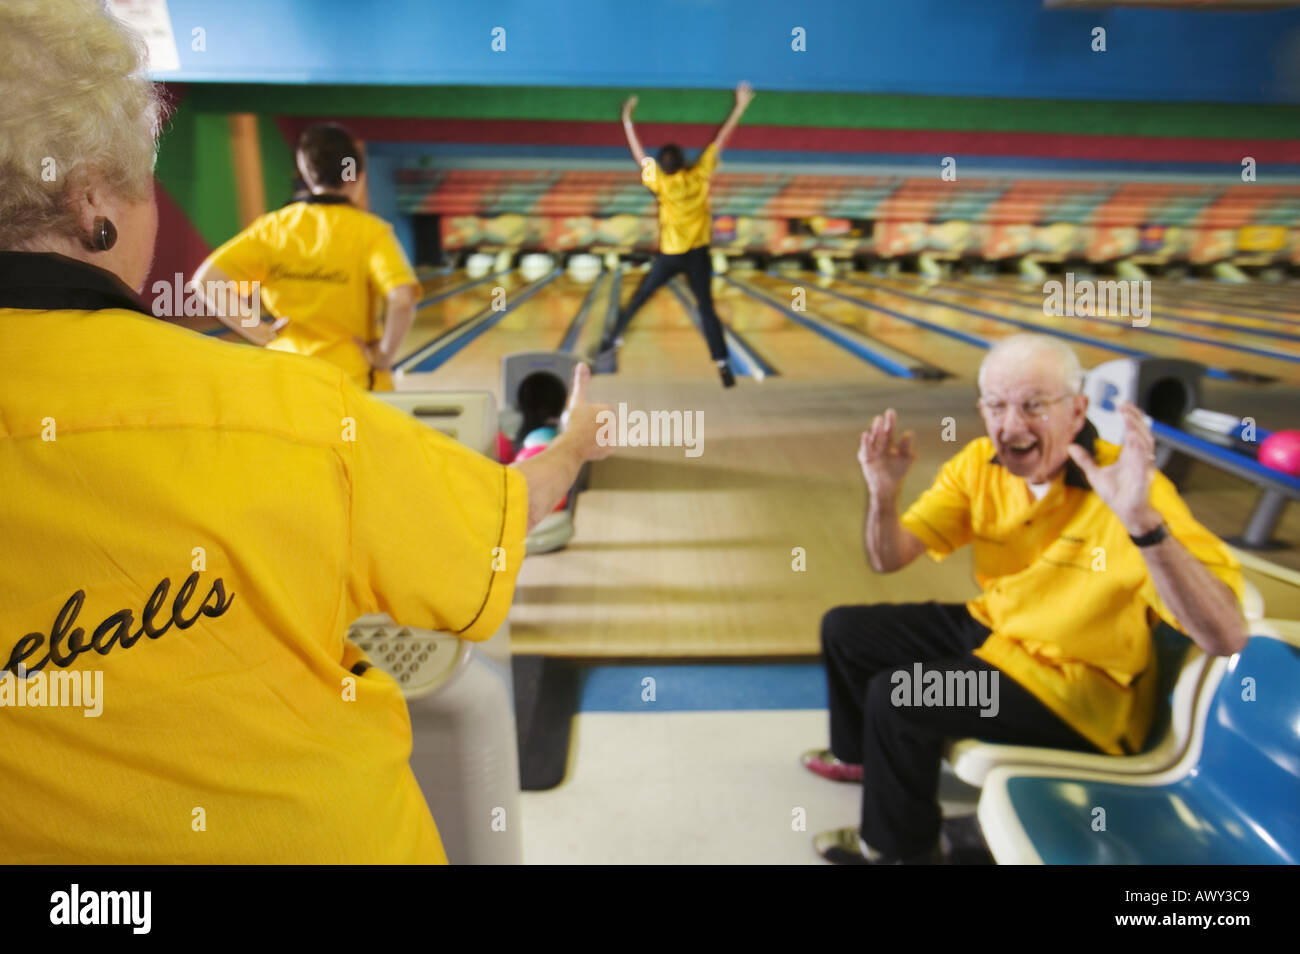 Bowling team cheering for a teammate Stock Photo